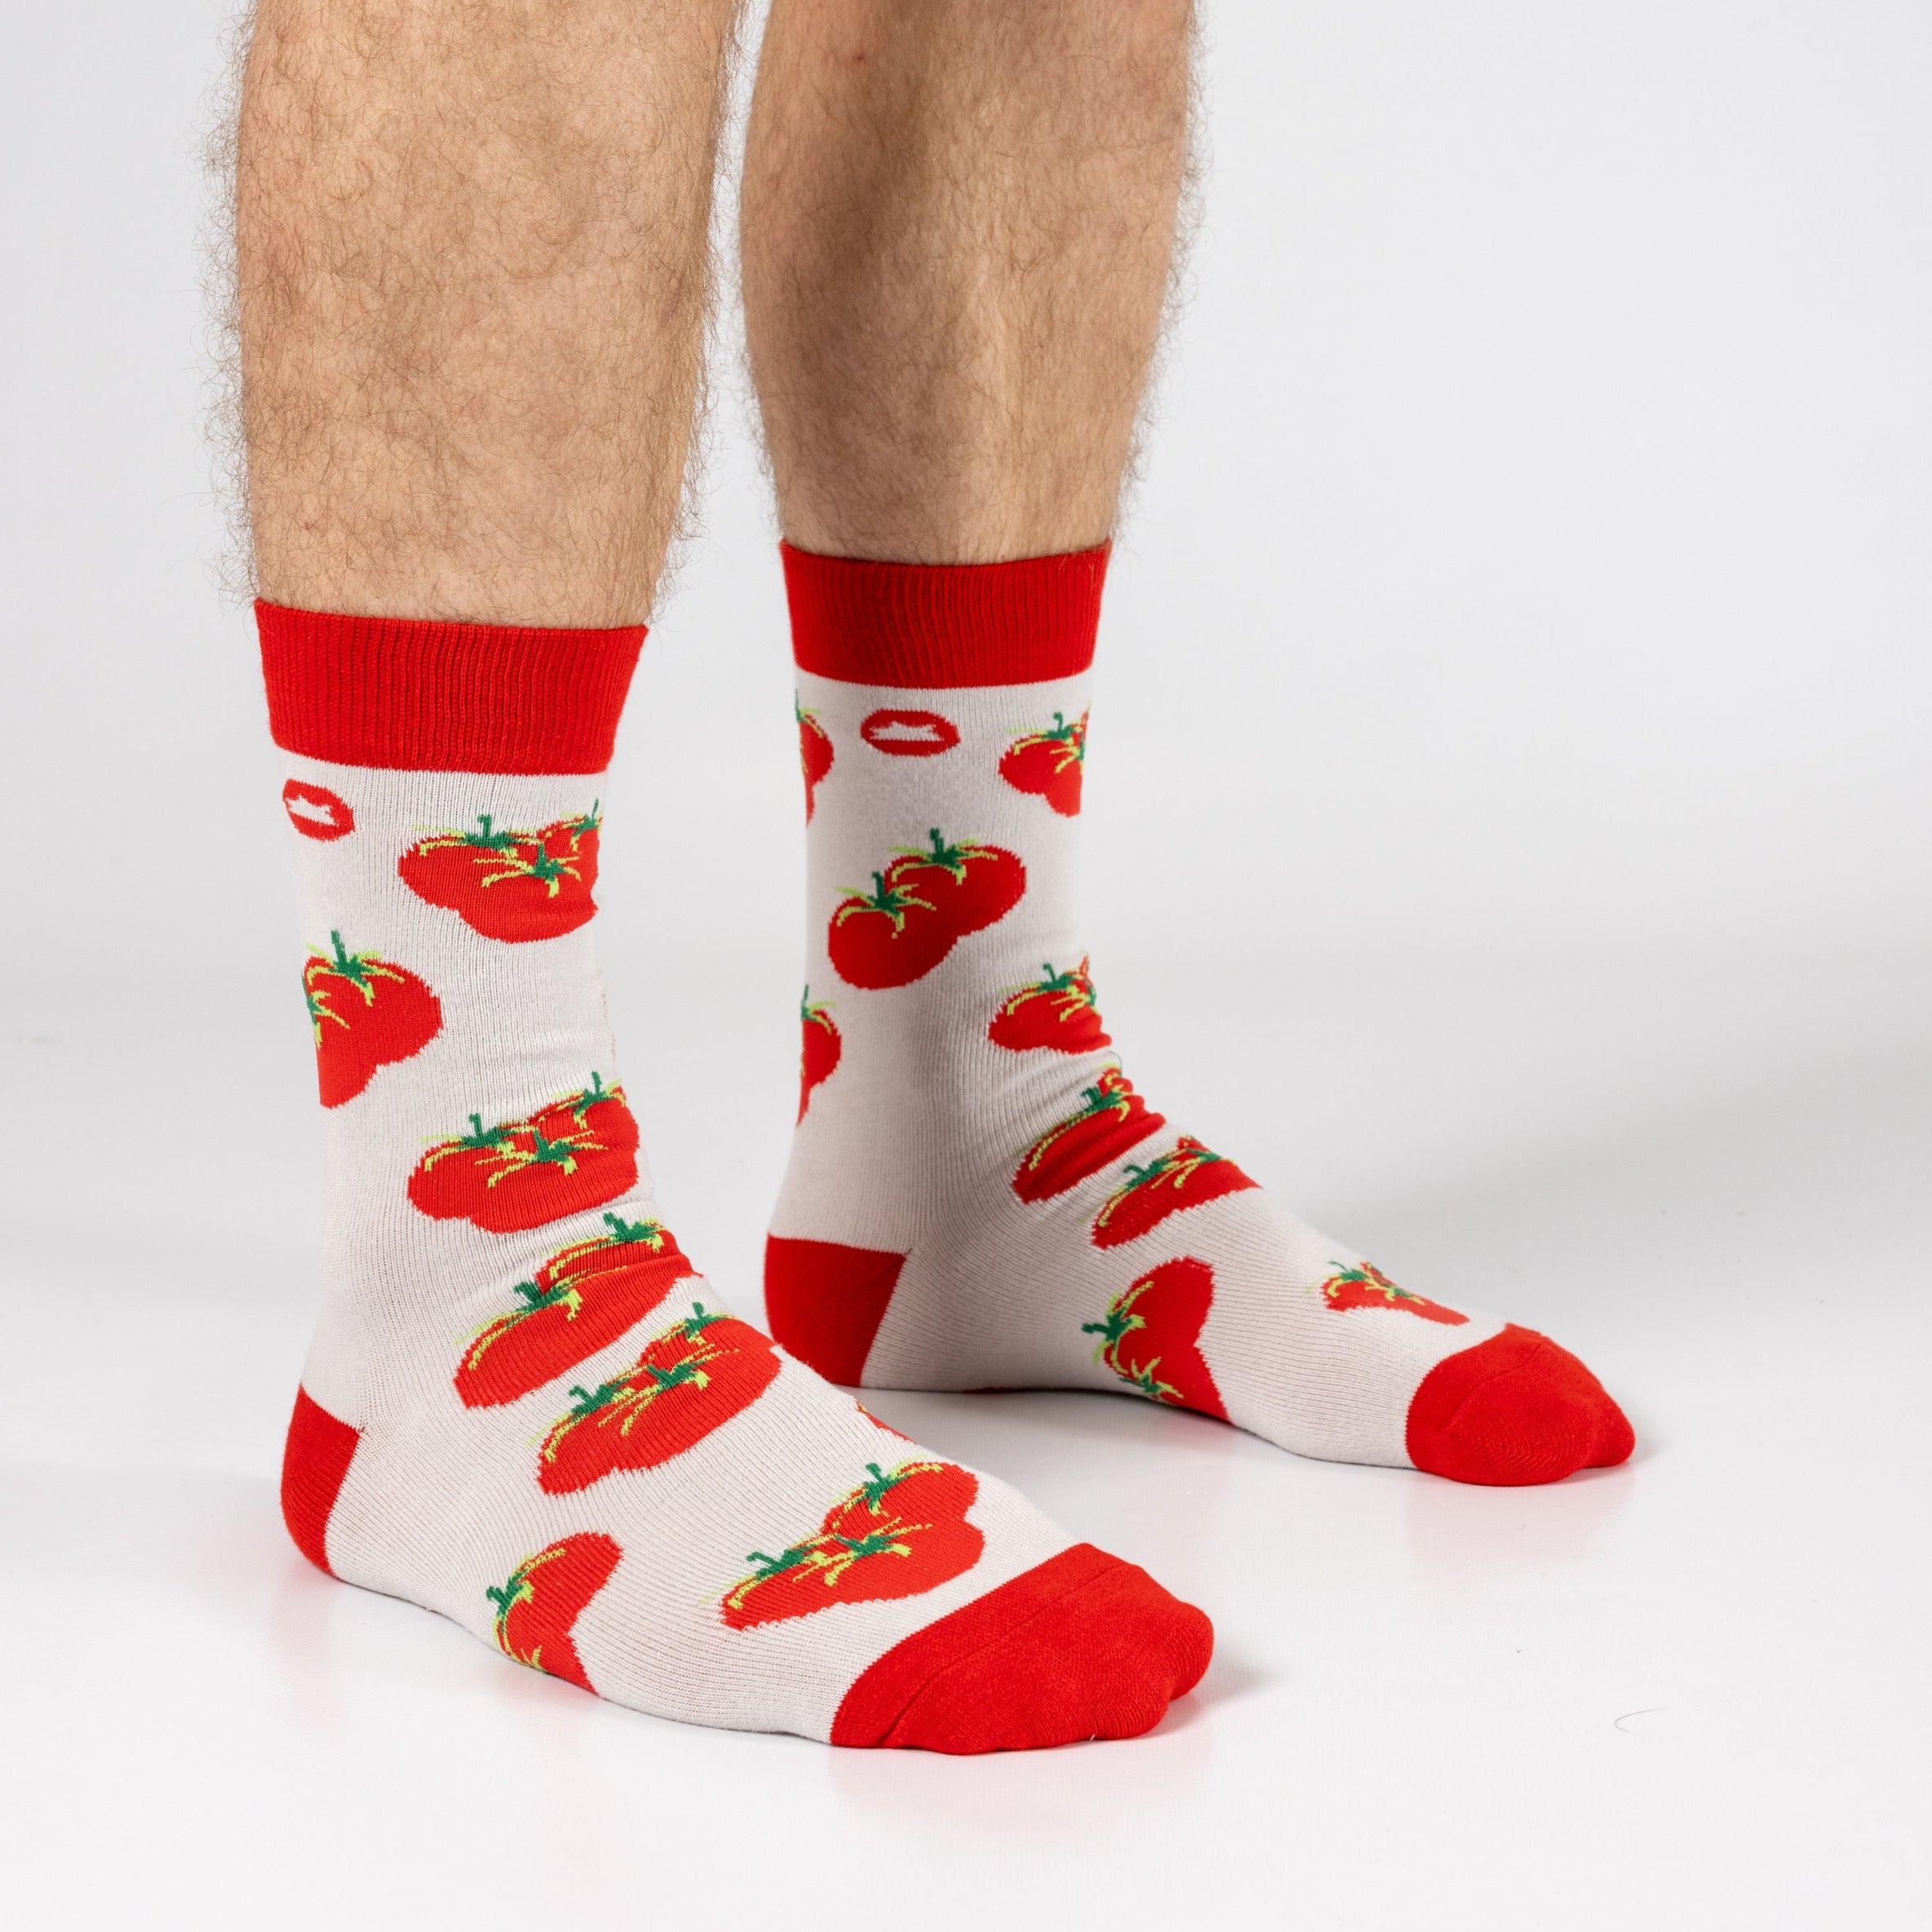 TOMATO BAMBOO SOCKS - We Are Hedgy